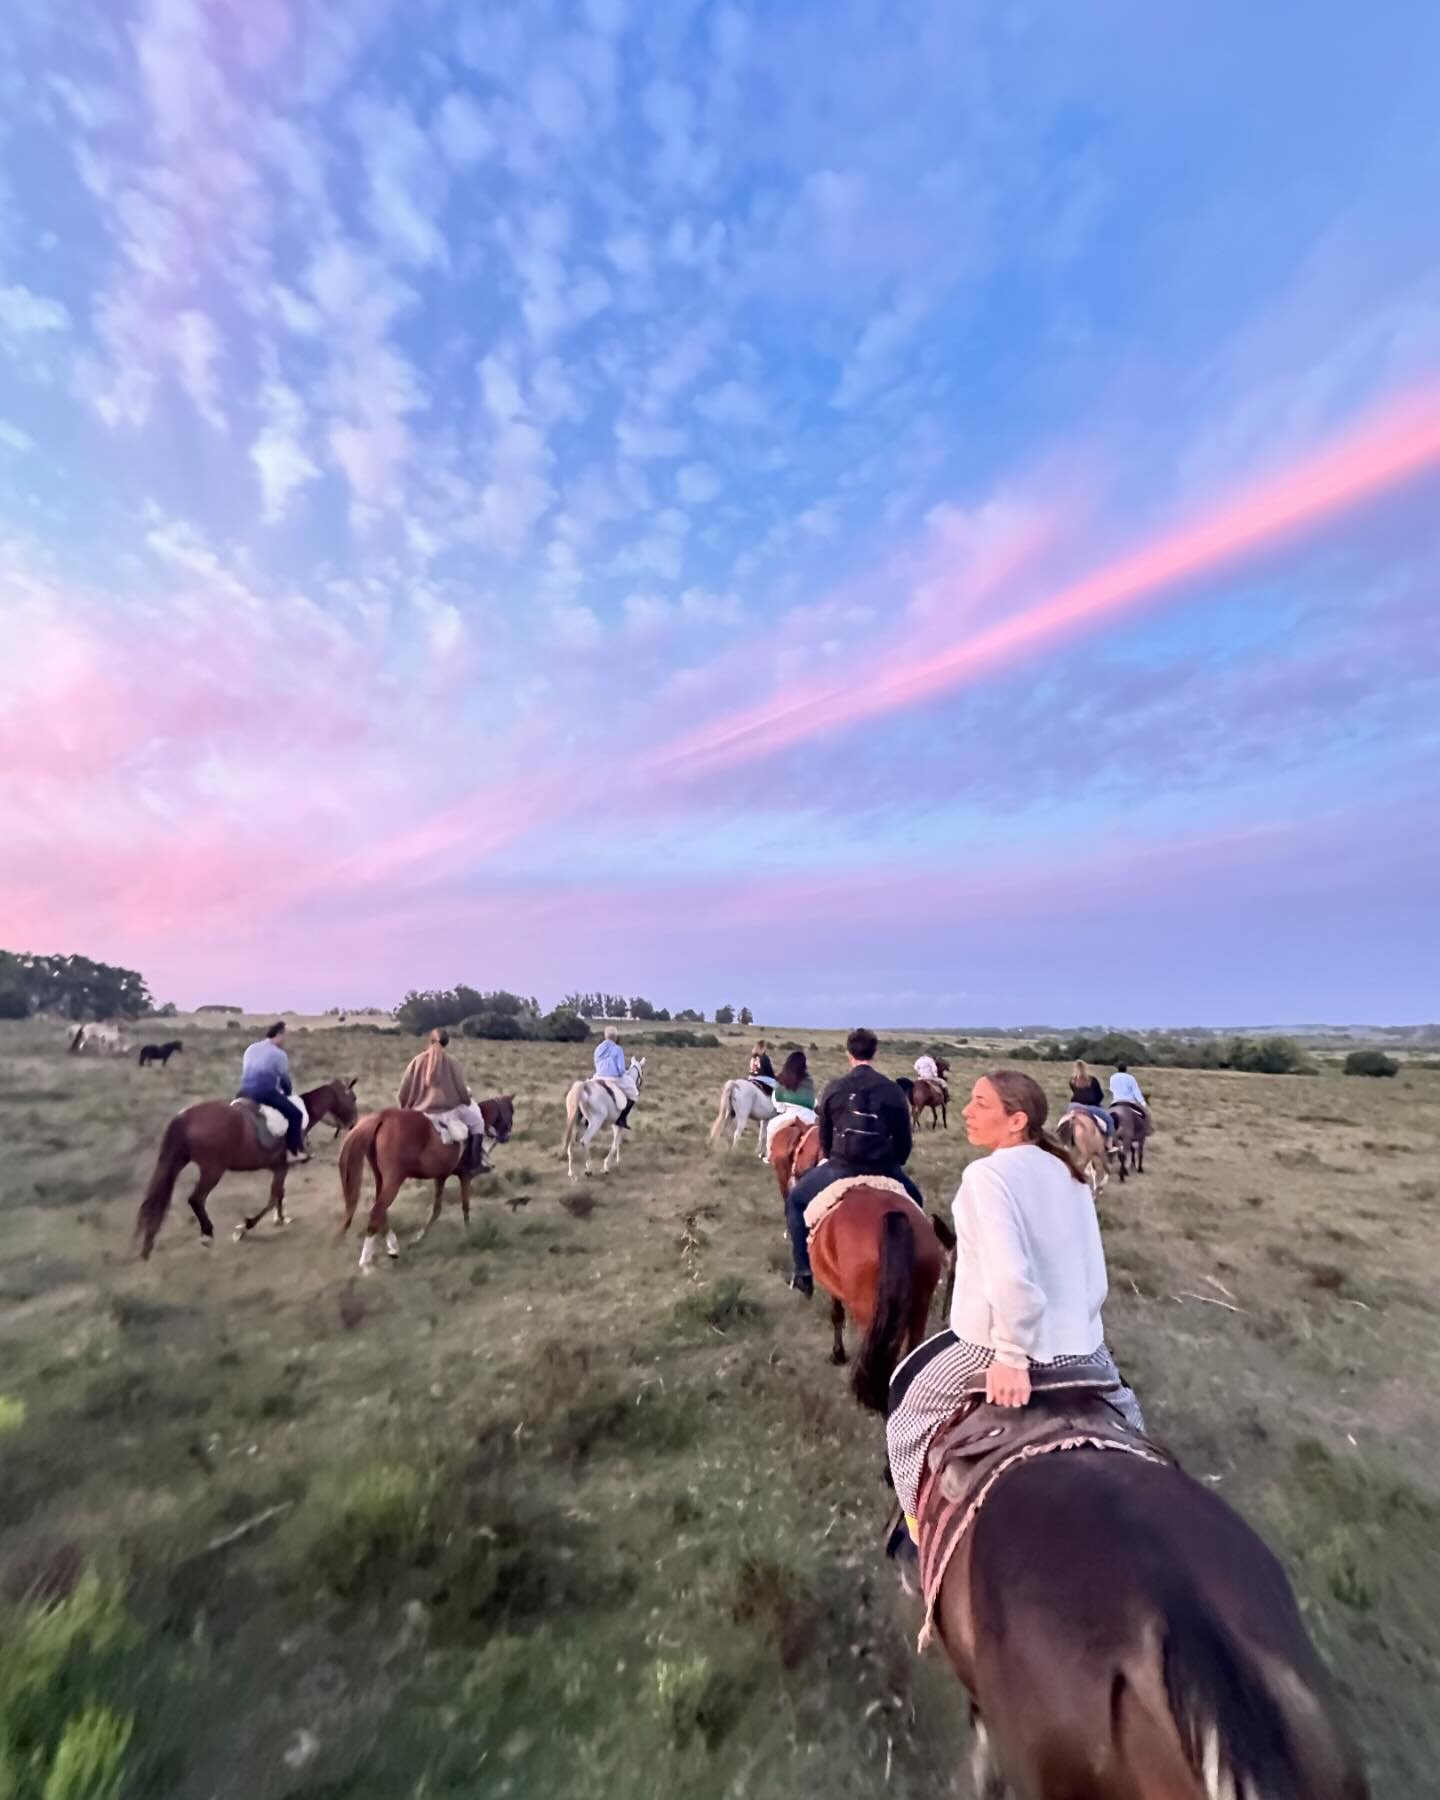 Our 8th retreat in Jose Ignacio, Uruguay ⛱️🪩✌🏽
Our first time adding a full moon horseback ride at Estancia Vik, and, as always, an absolutely unforgettable experience. 
This retreat is the retreat that keeps on giving, beyond expectation, year aft